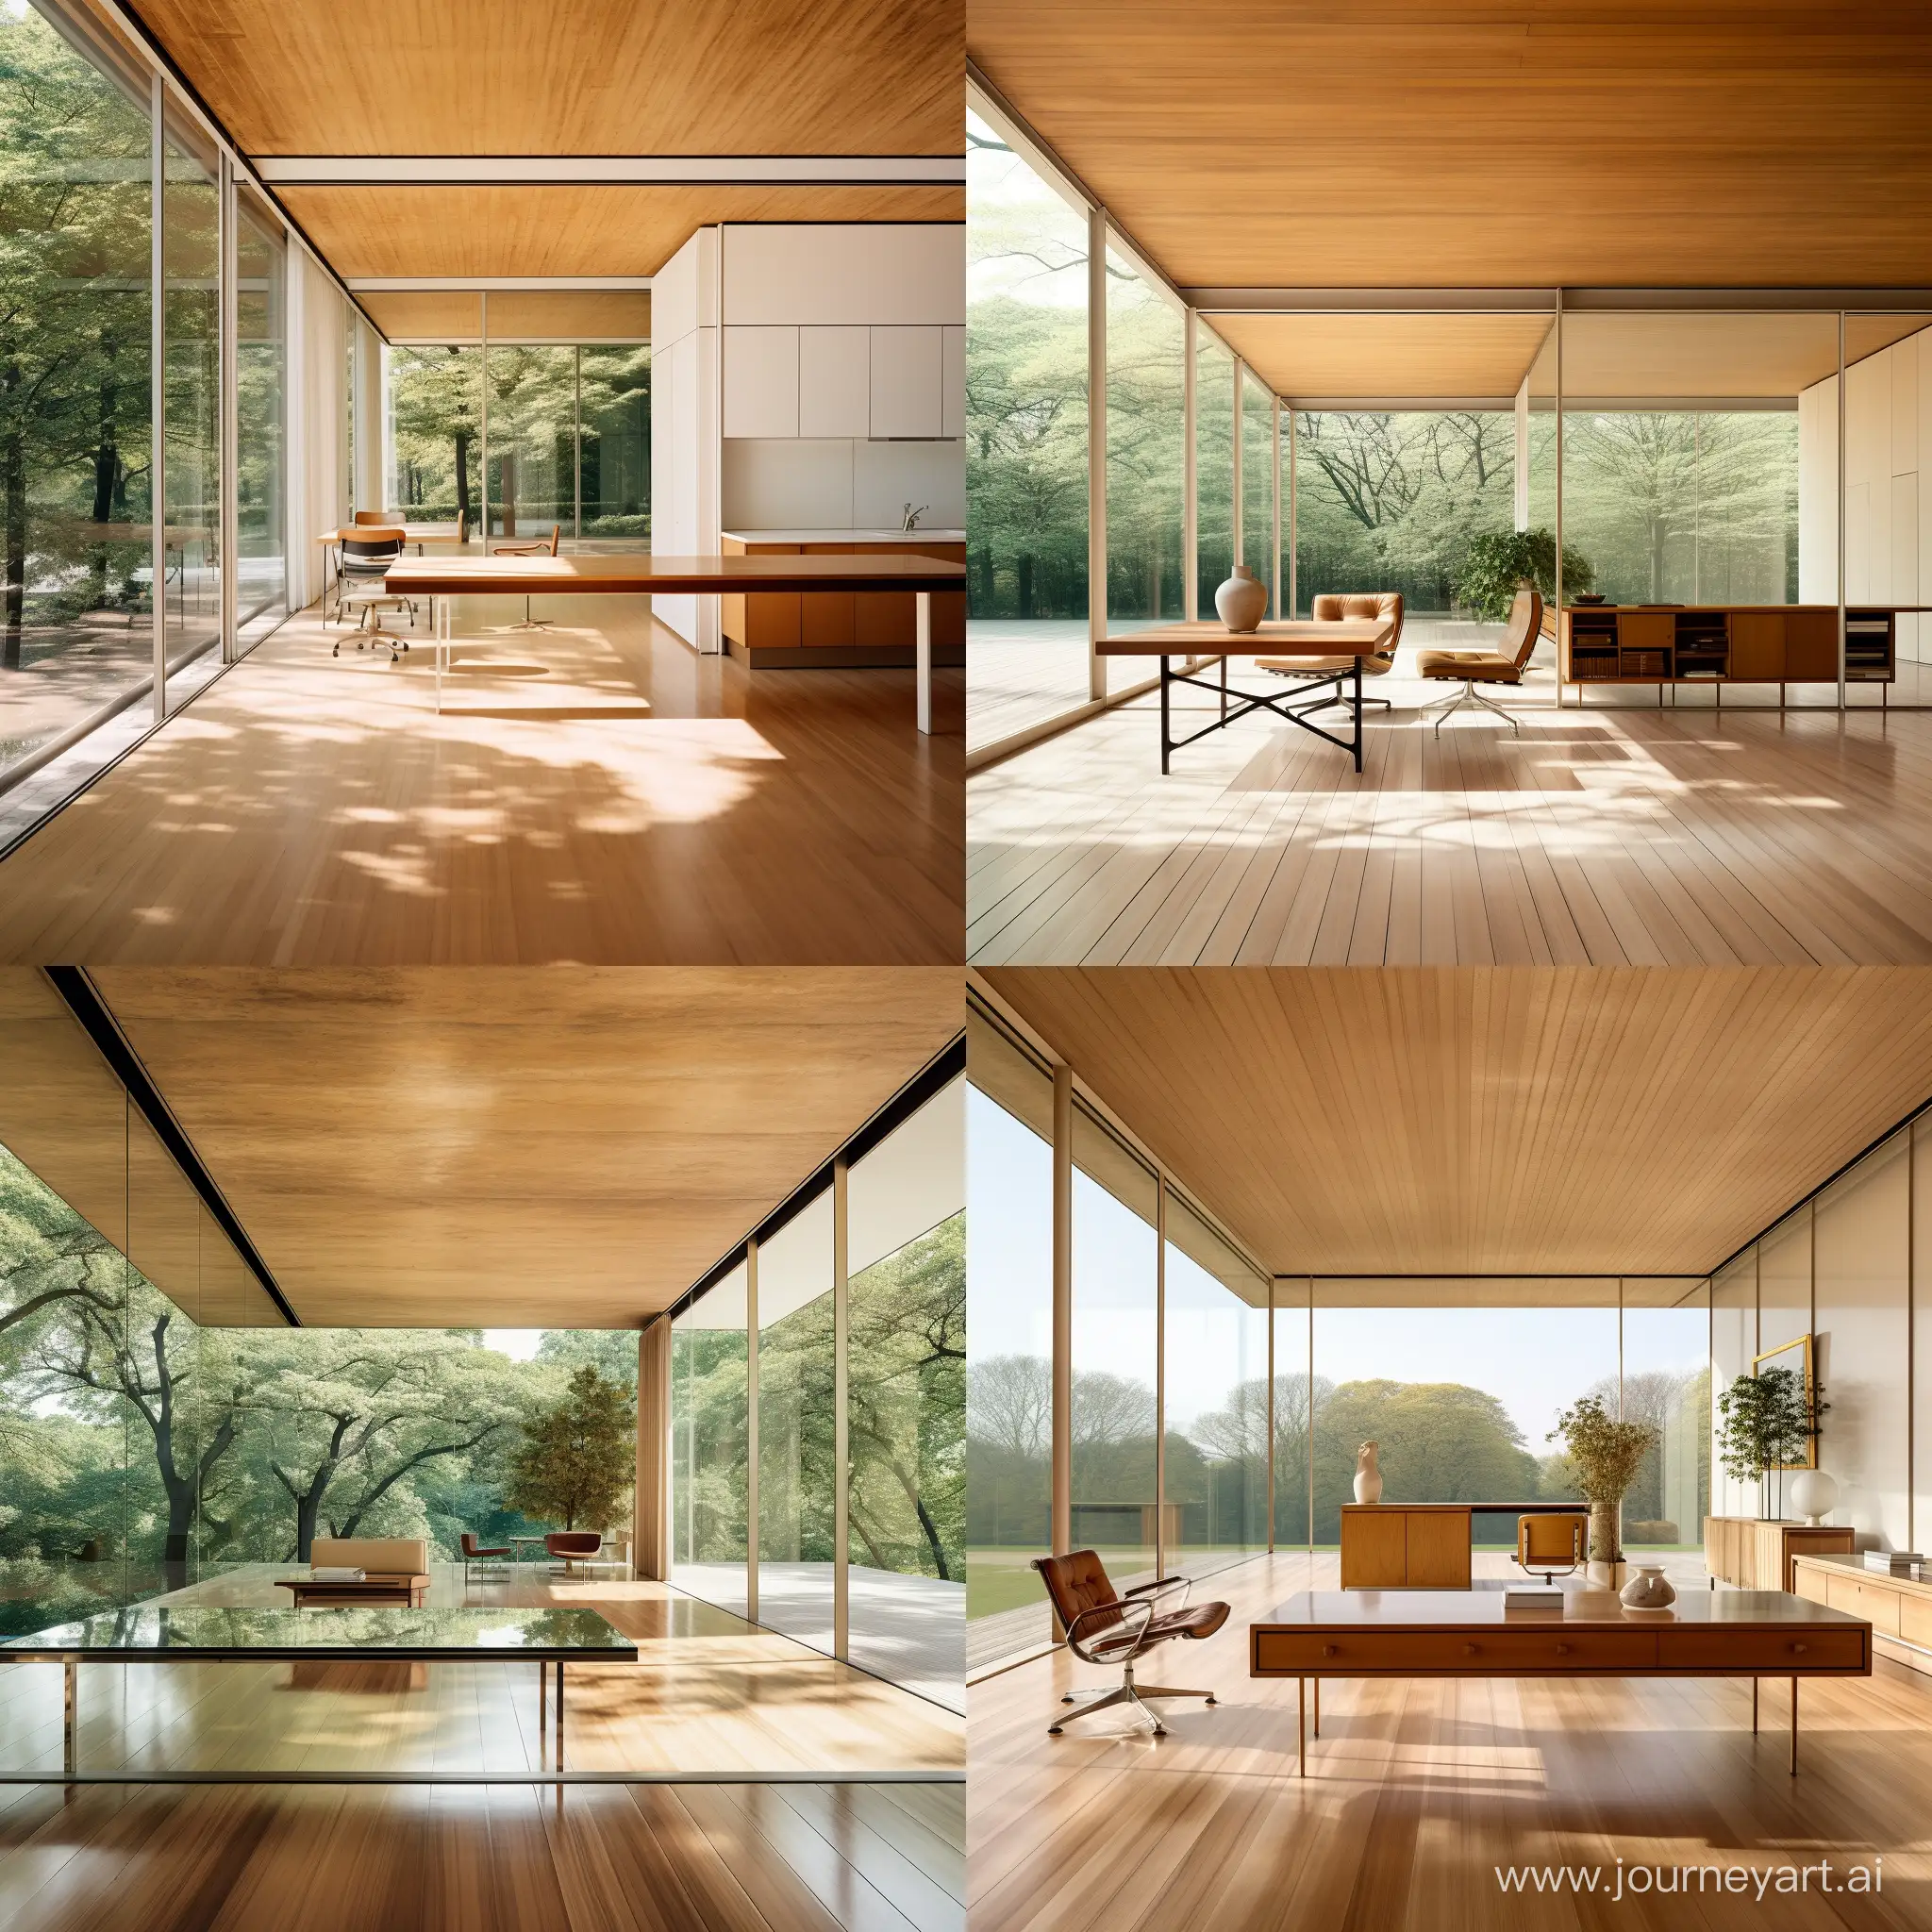 Contemporary-Minimalist-Interior-Design-Mies-van-der-Rohe-Inspired-Open-Space-with-Glossy-Timber-Flooring